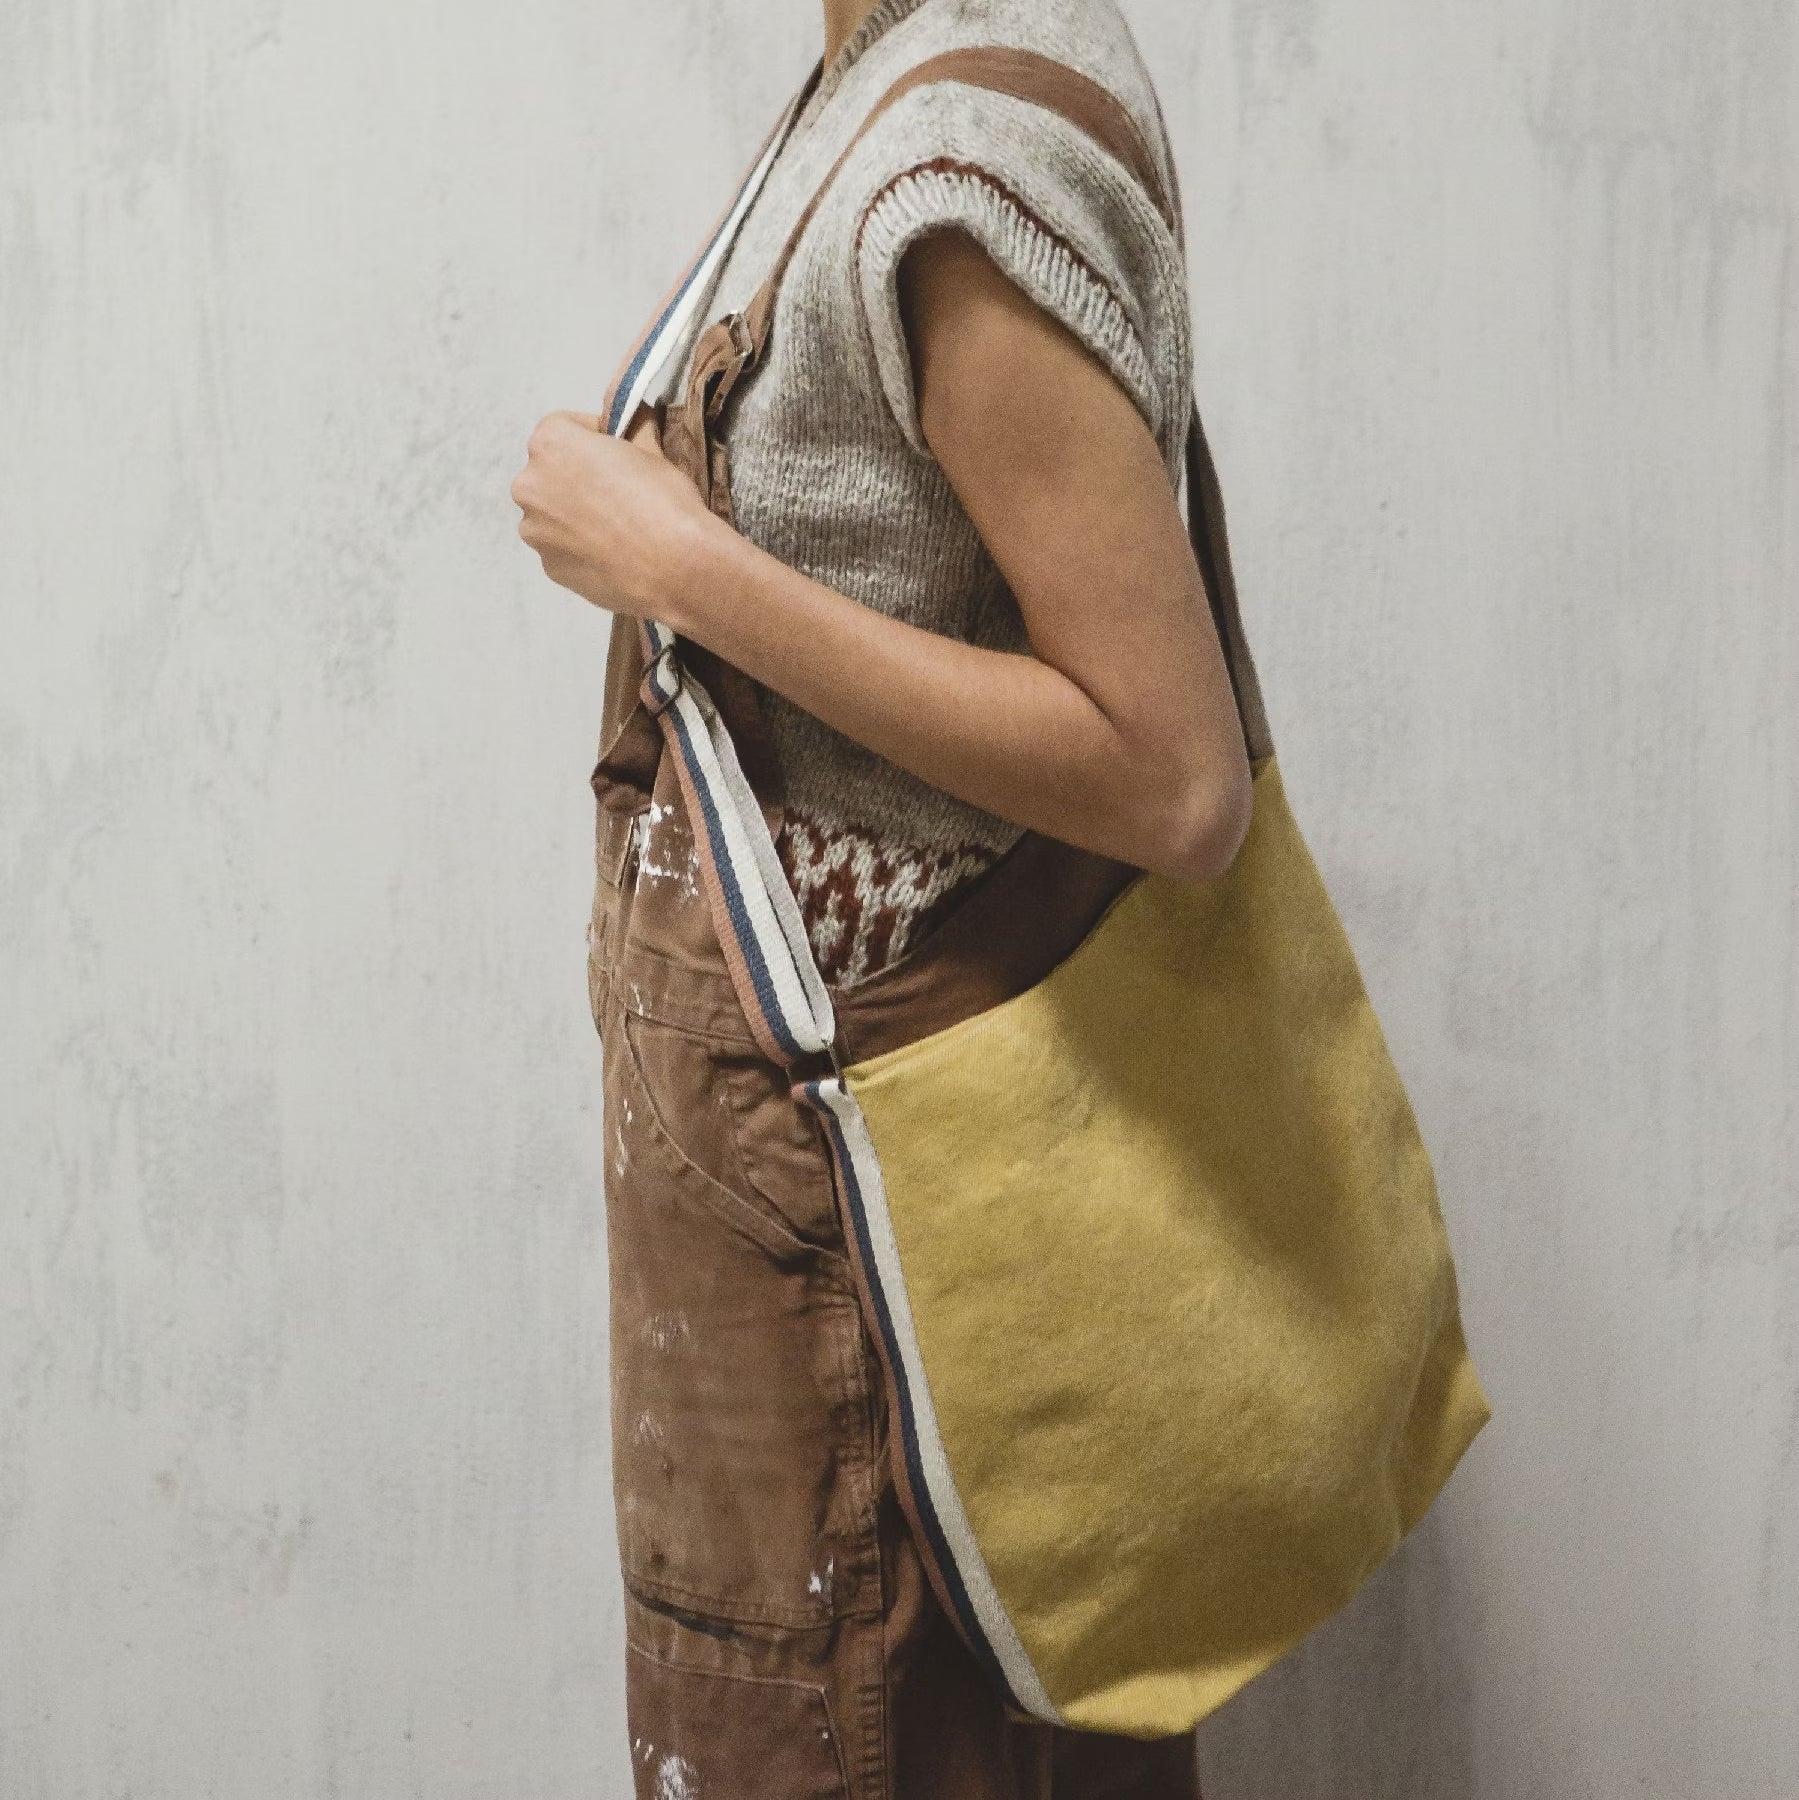 ellis bag collection messenger tote belgian linen by libeco on adorn.house